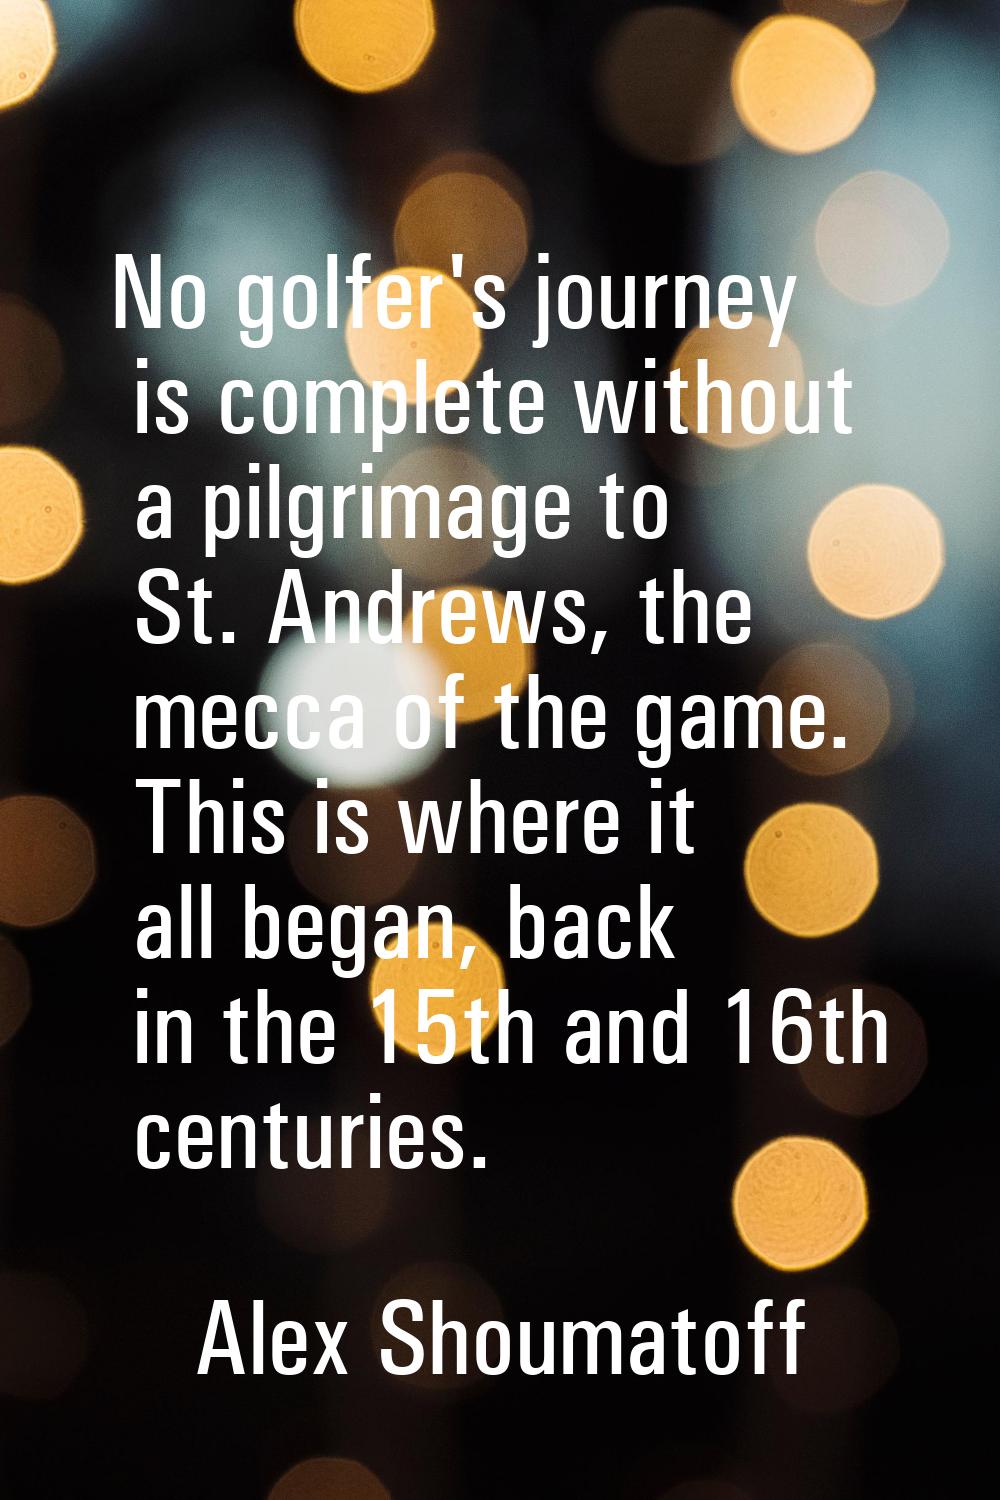 No golfer's journey is complete without a pilgrimage to St. Andrews, the mecca of the game. This is